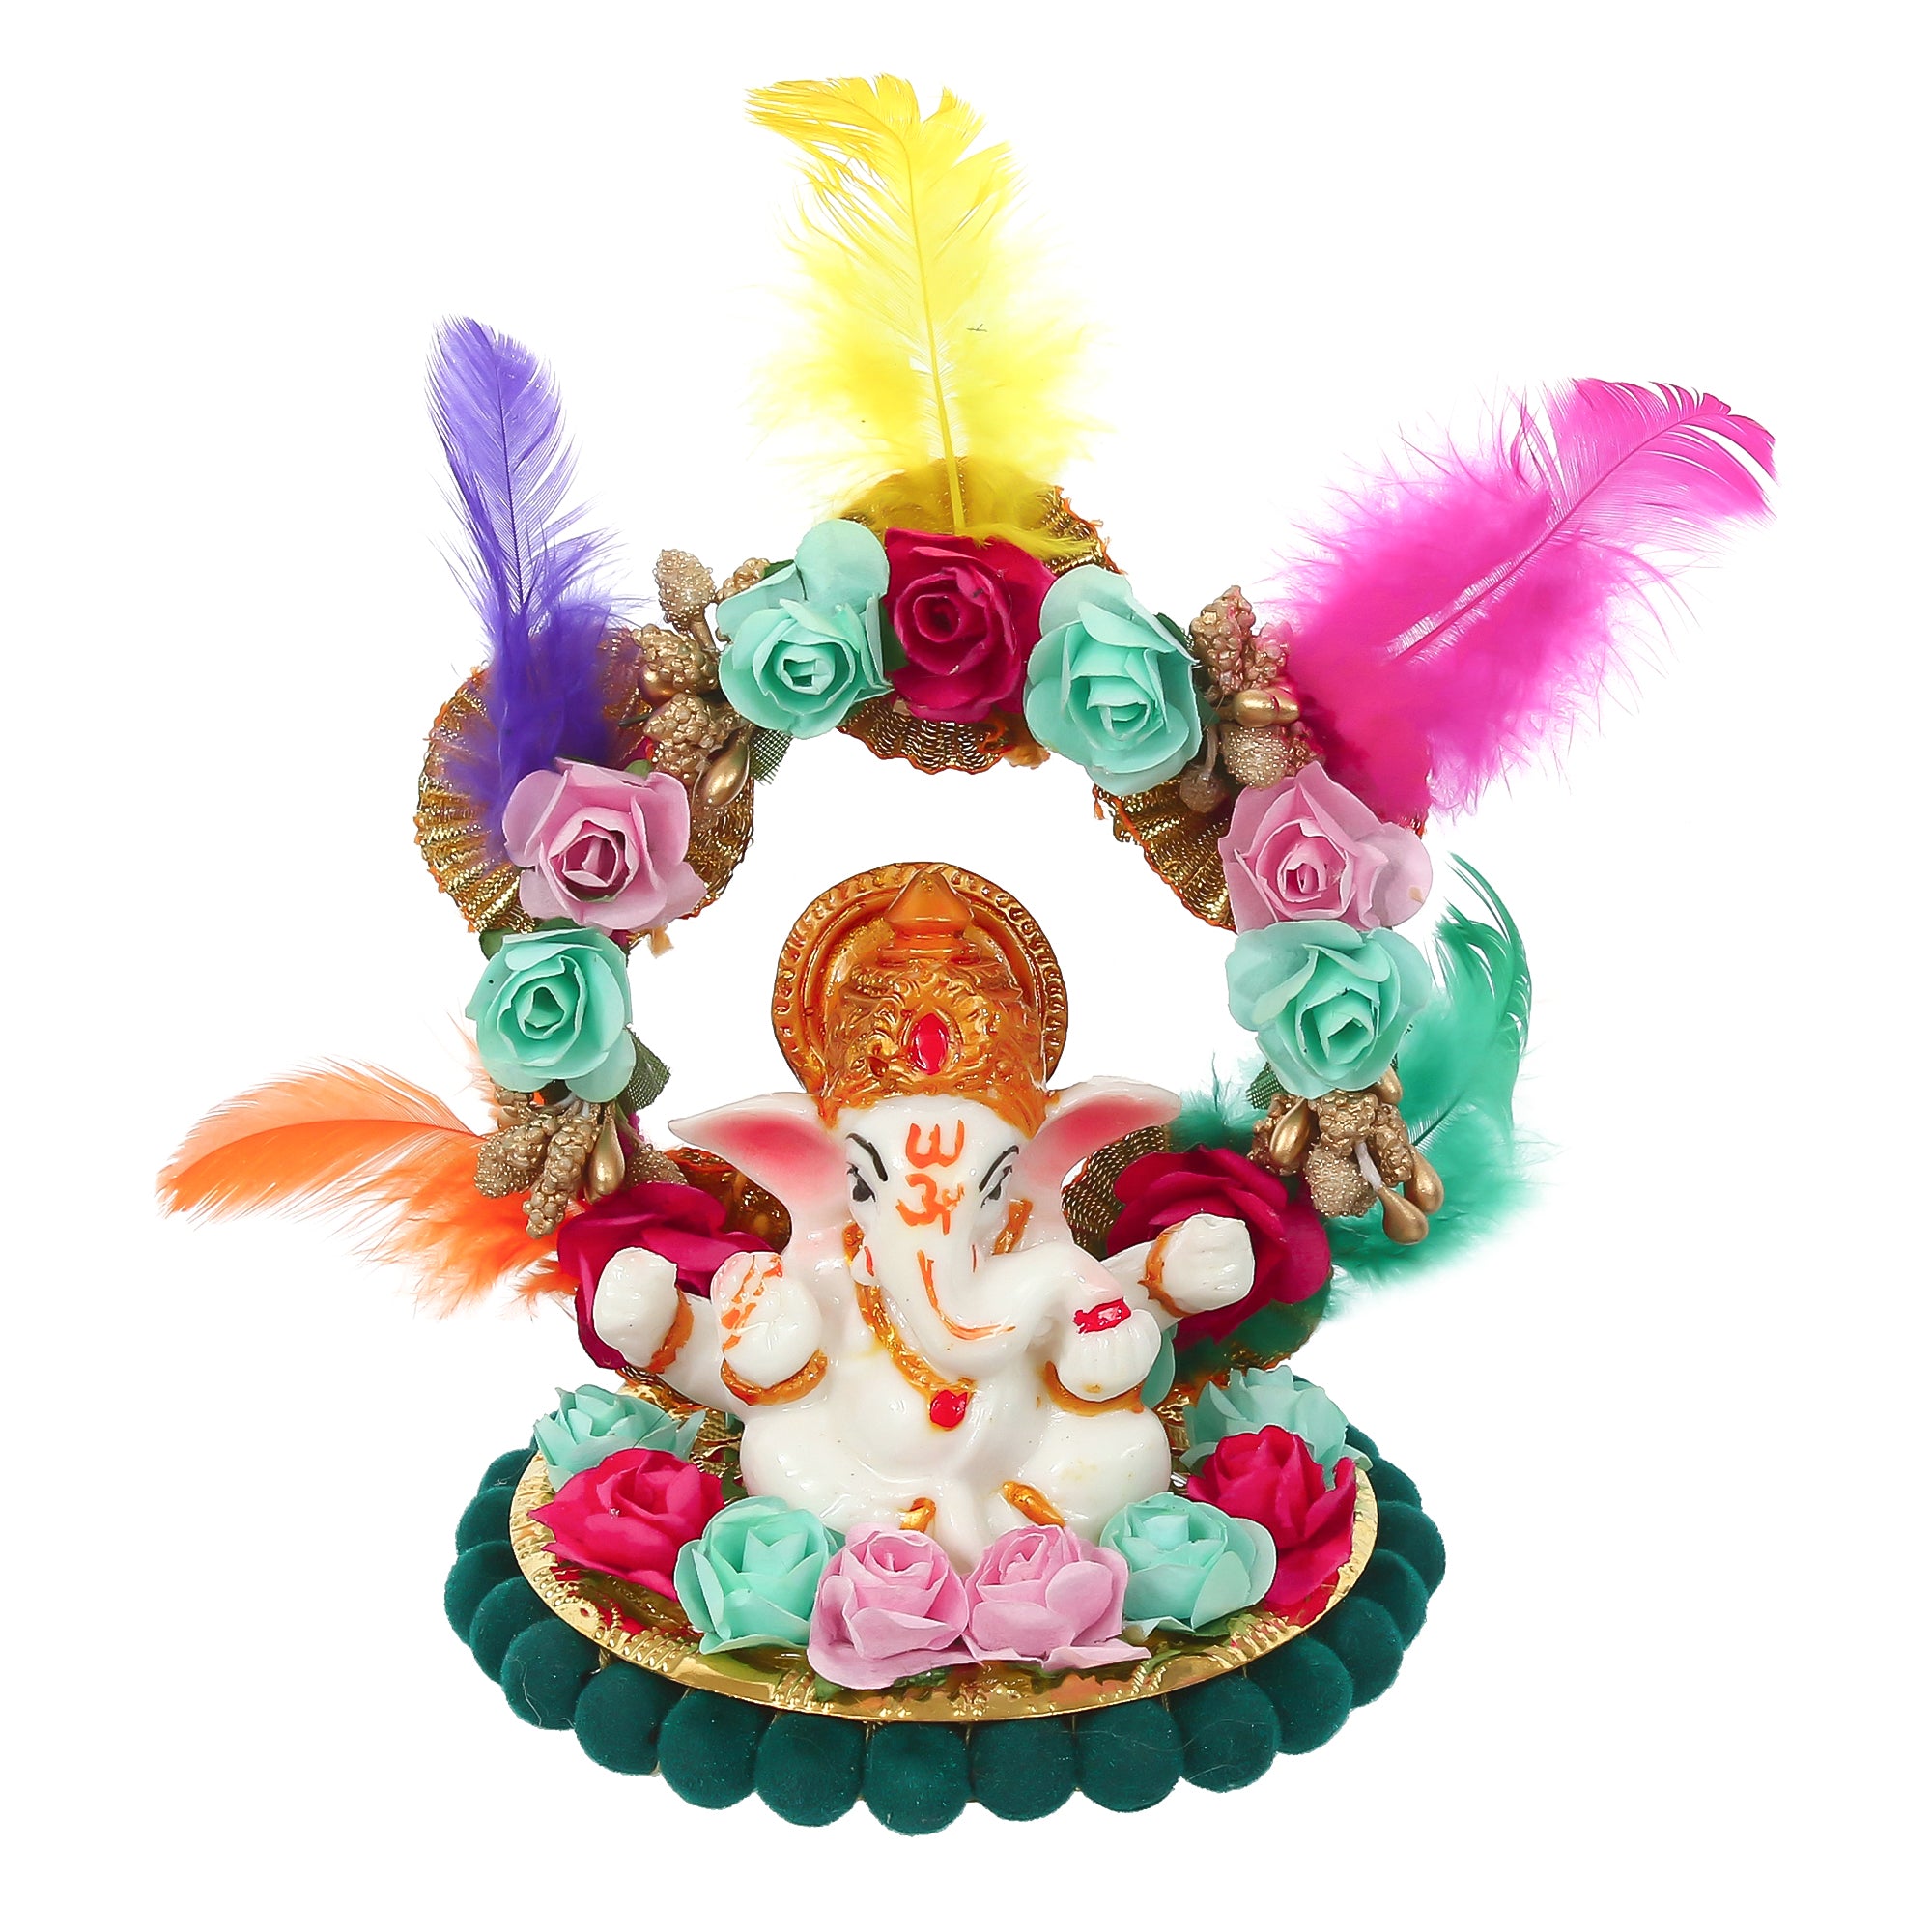 Lord Ganesha Idol On Decorative Handcrafted Plate With Throne Of Colorful Flowers And Feathers 2